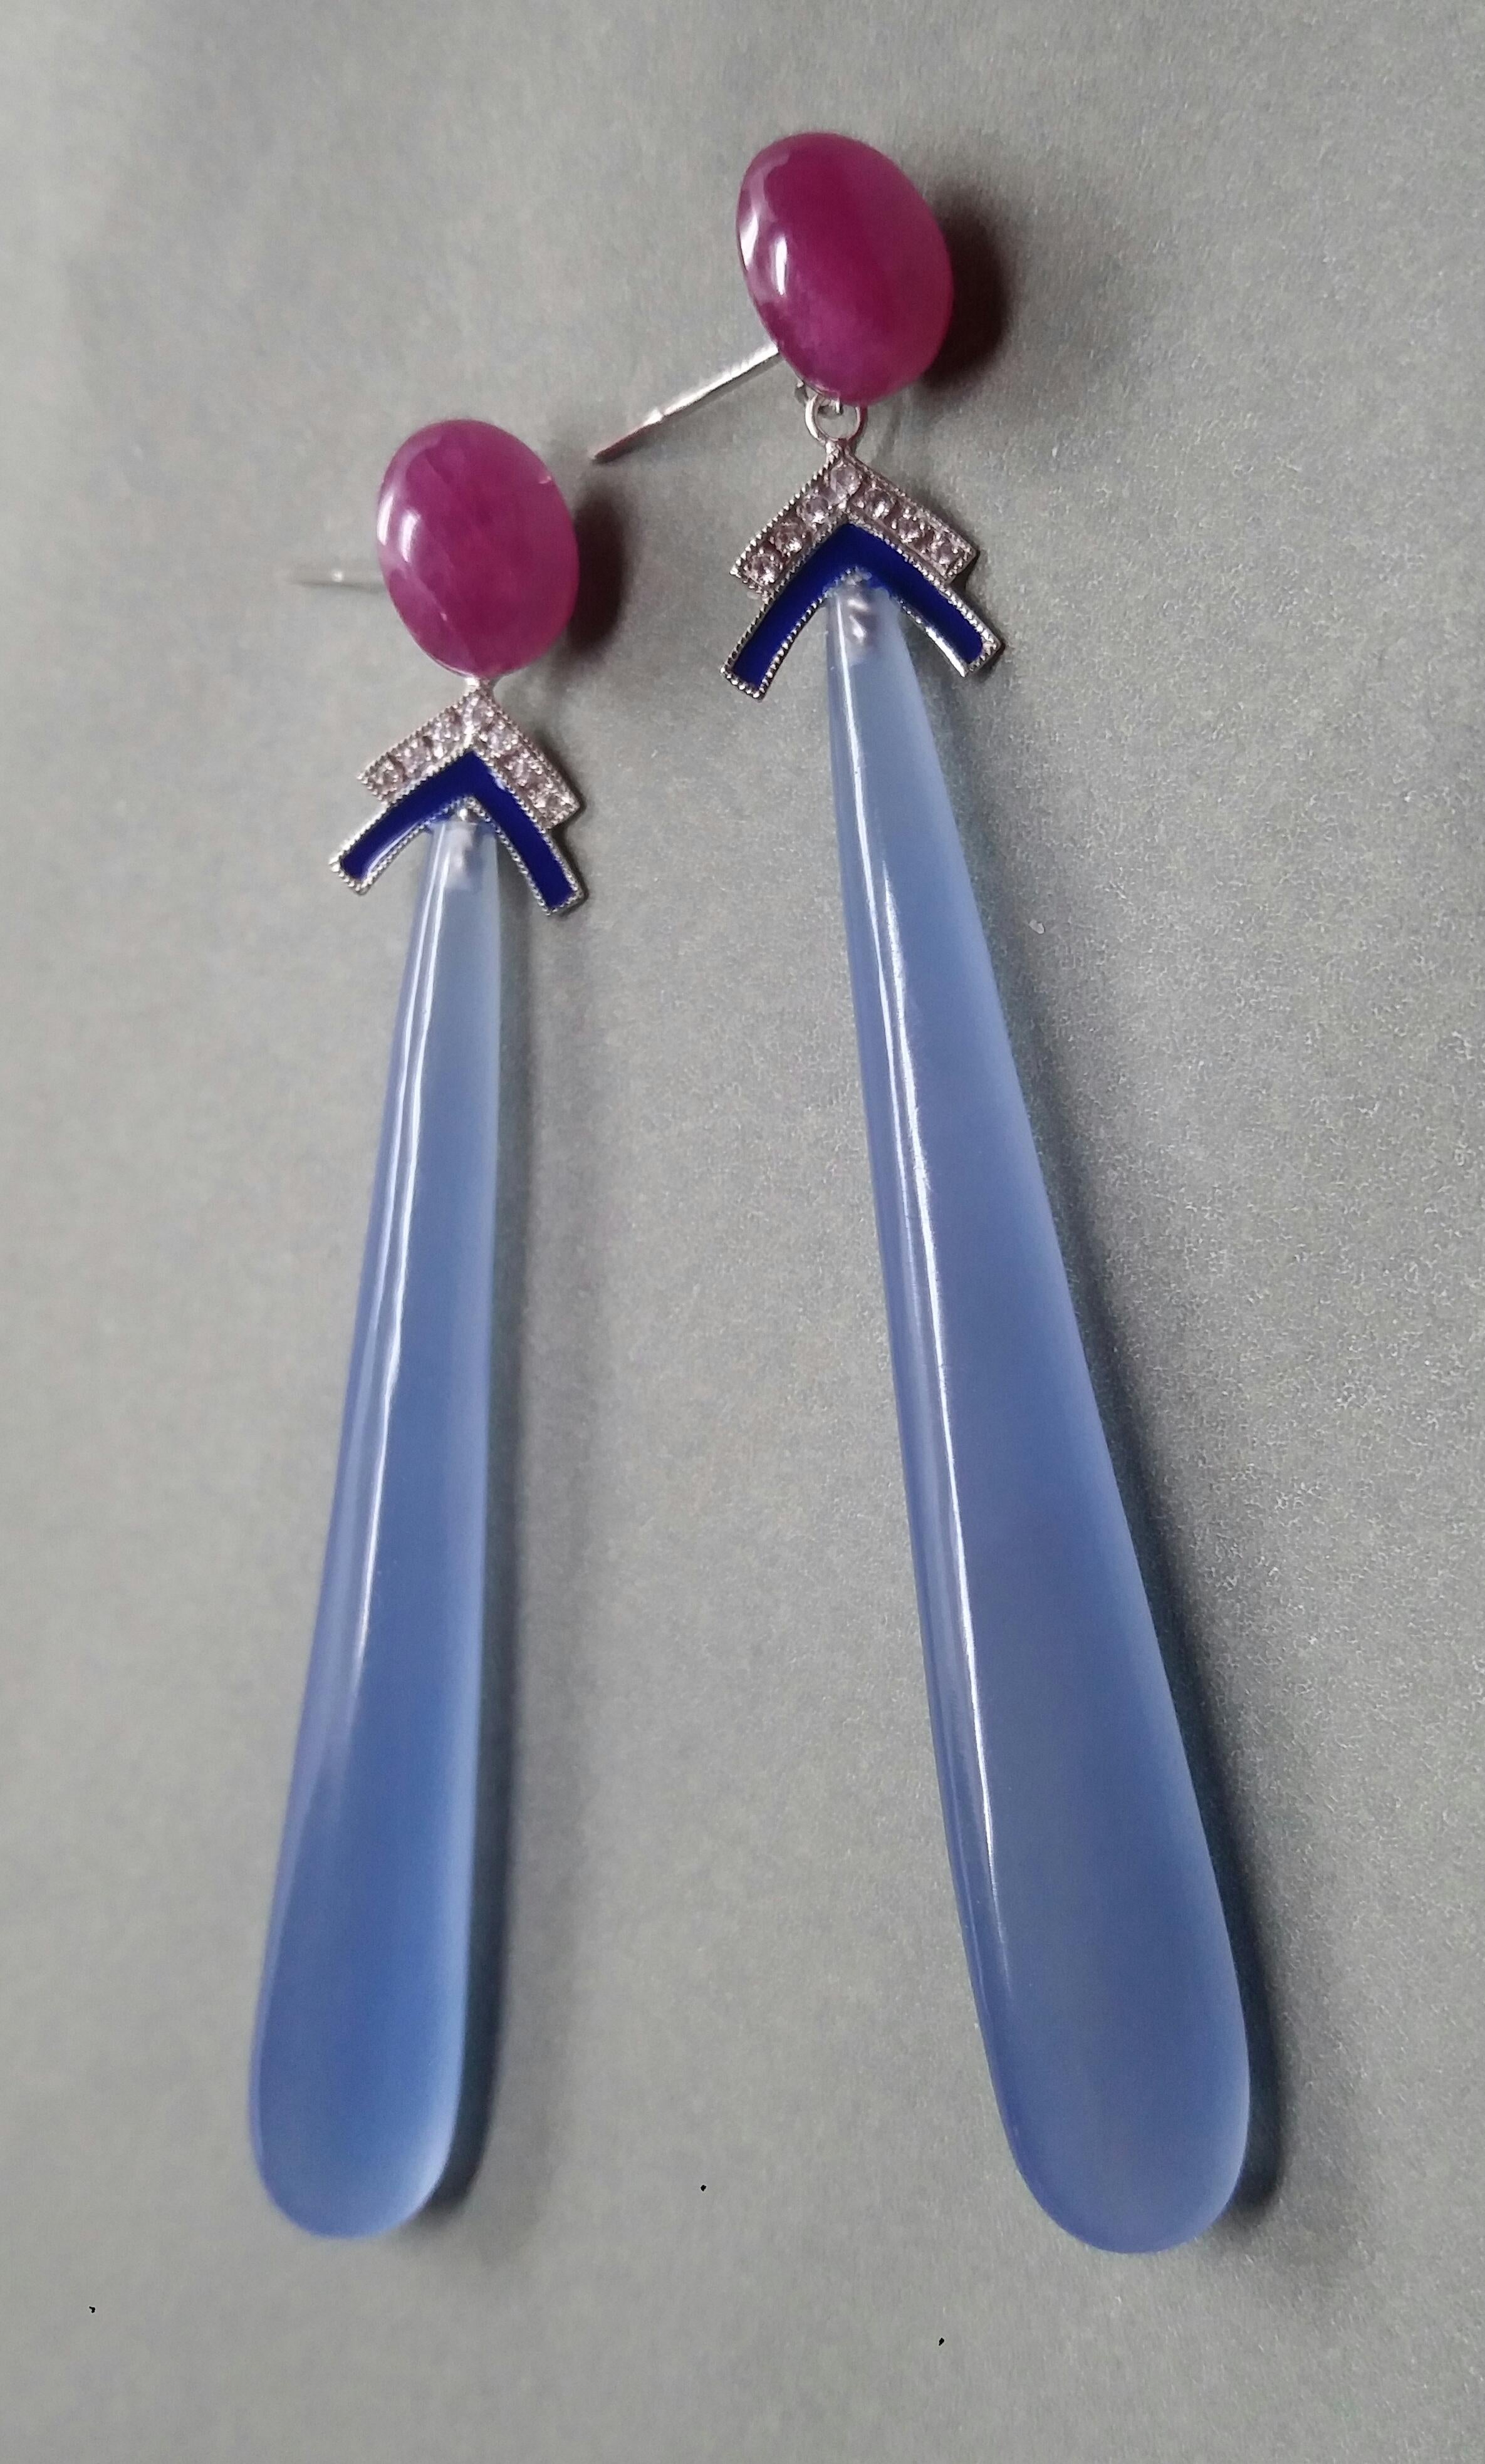 In these classic Art Deco Style Earrings we have 2 oval Ruby Cabochons on top,then 2 white gold elements with diamonds and blue enamel  to which are suspended 2 long drops of Blue Agate

In 1978 our workshop started in Italy to make simple-chic Art